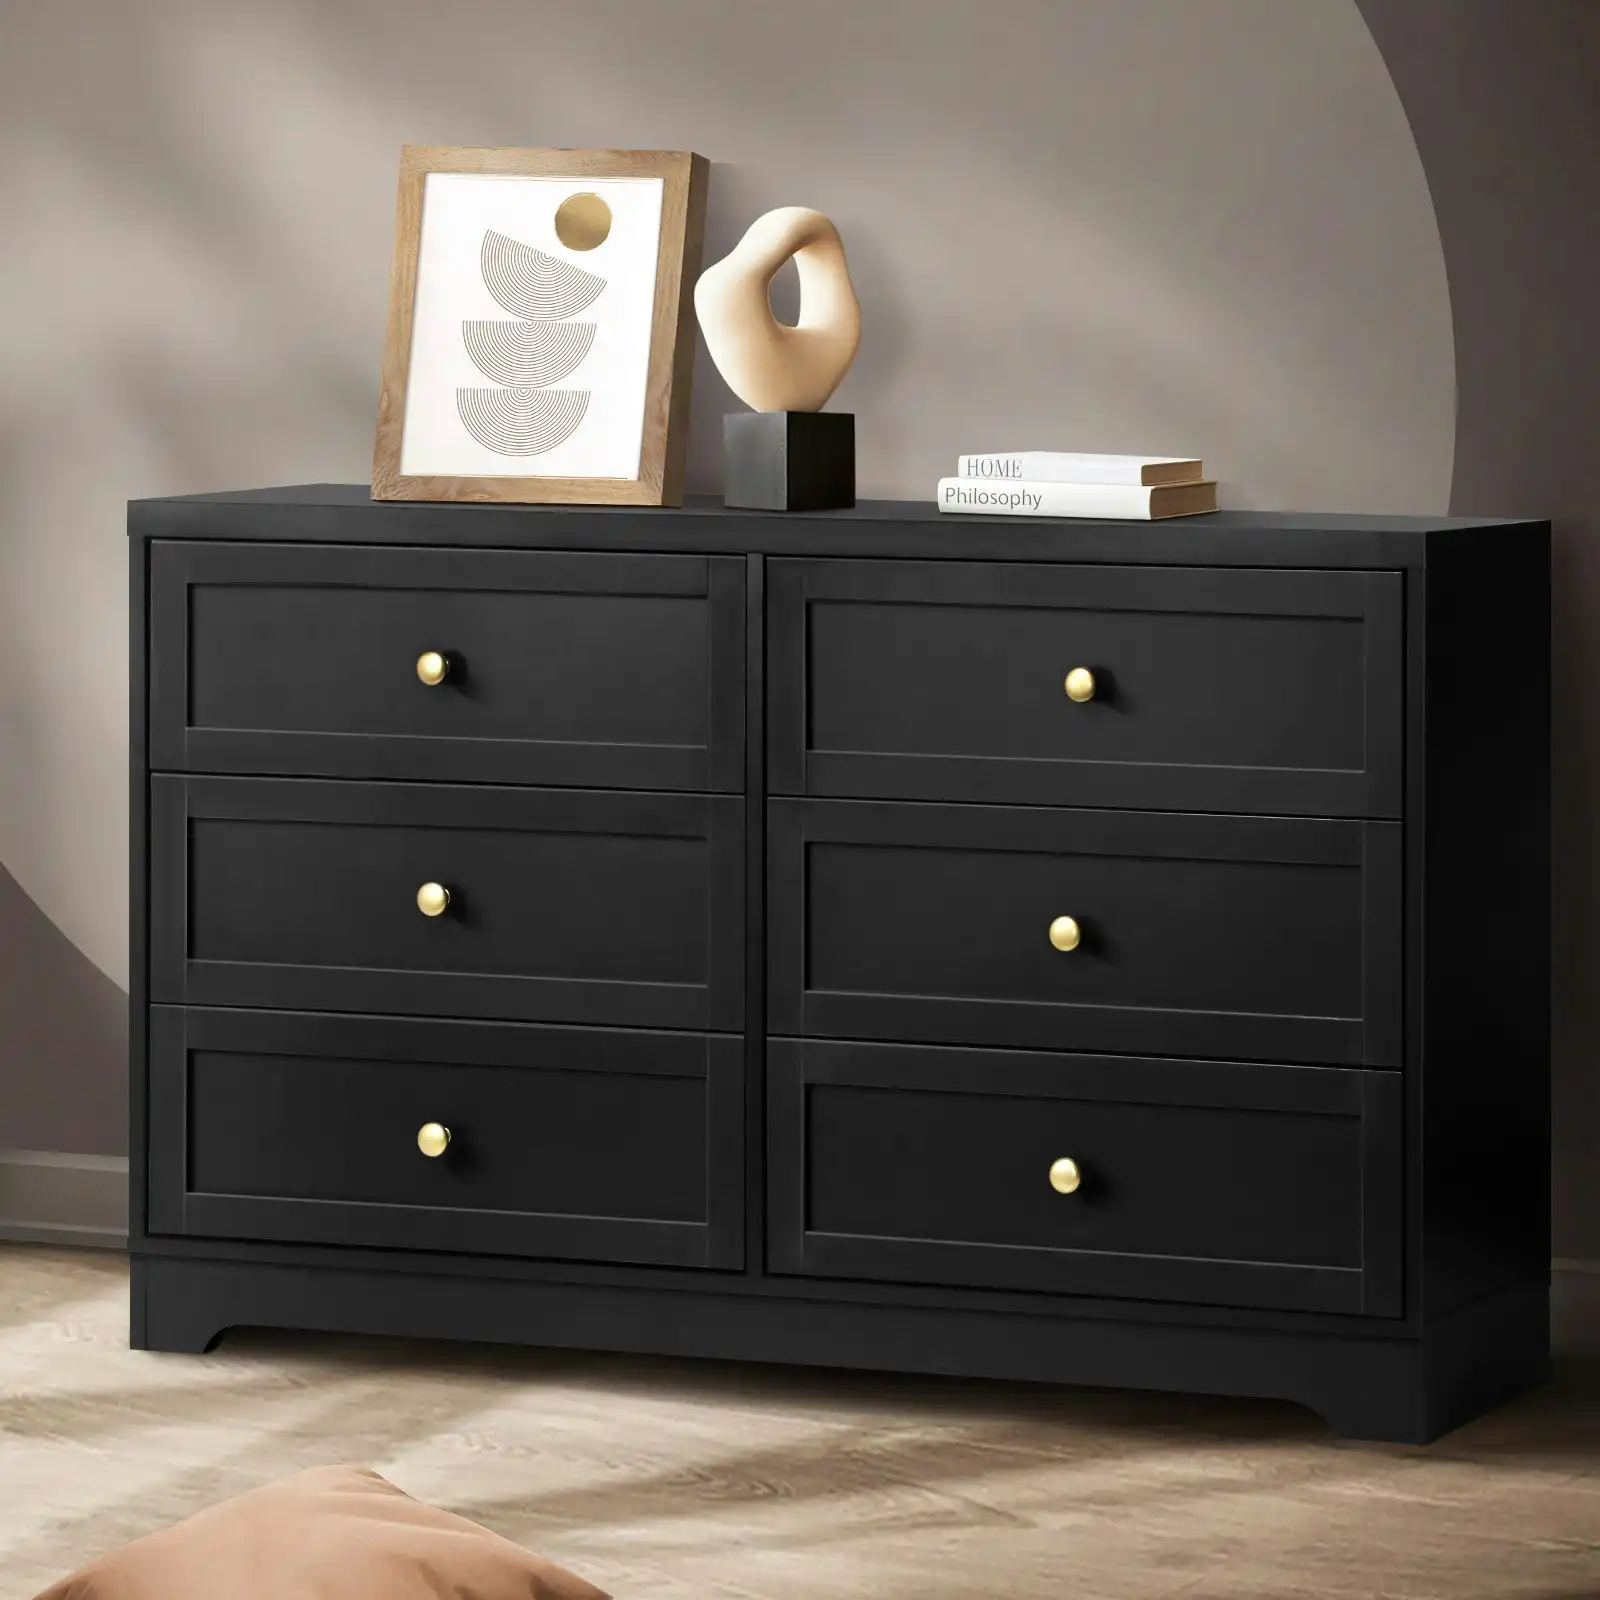 Oikiture 6 Chest of Drawers Tallboy Black Hamptons